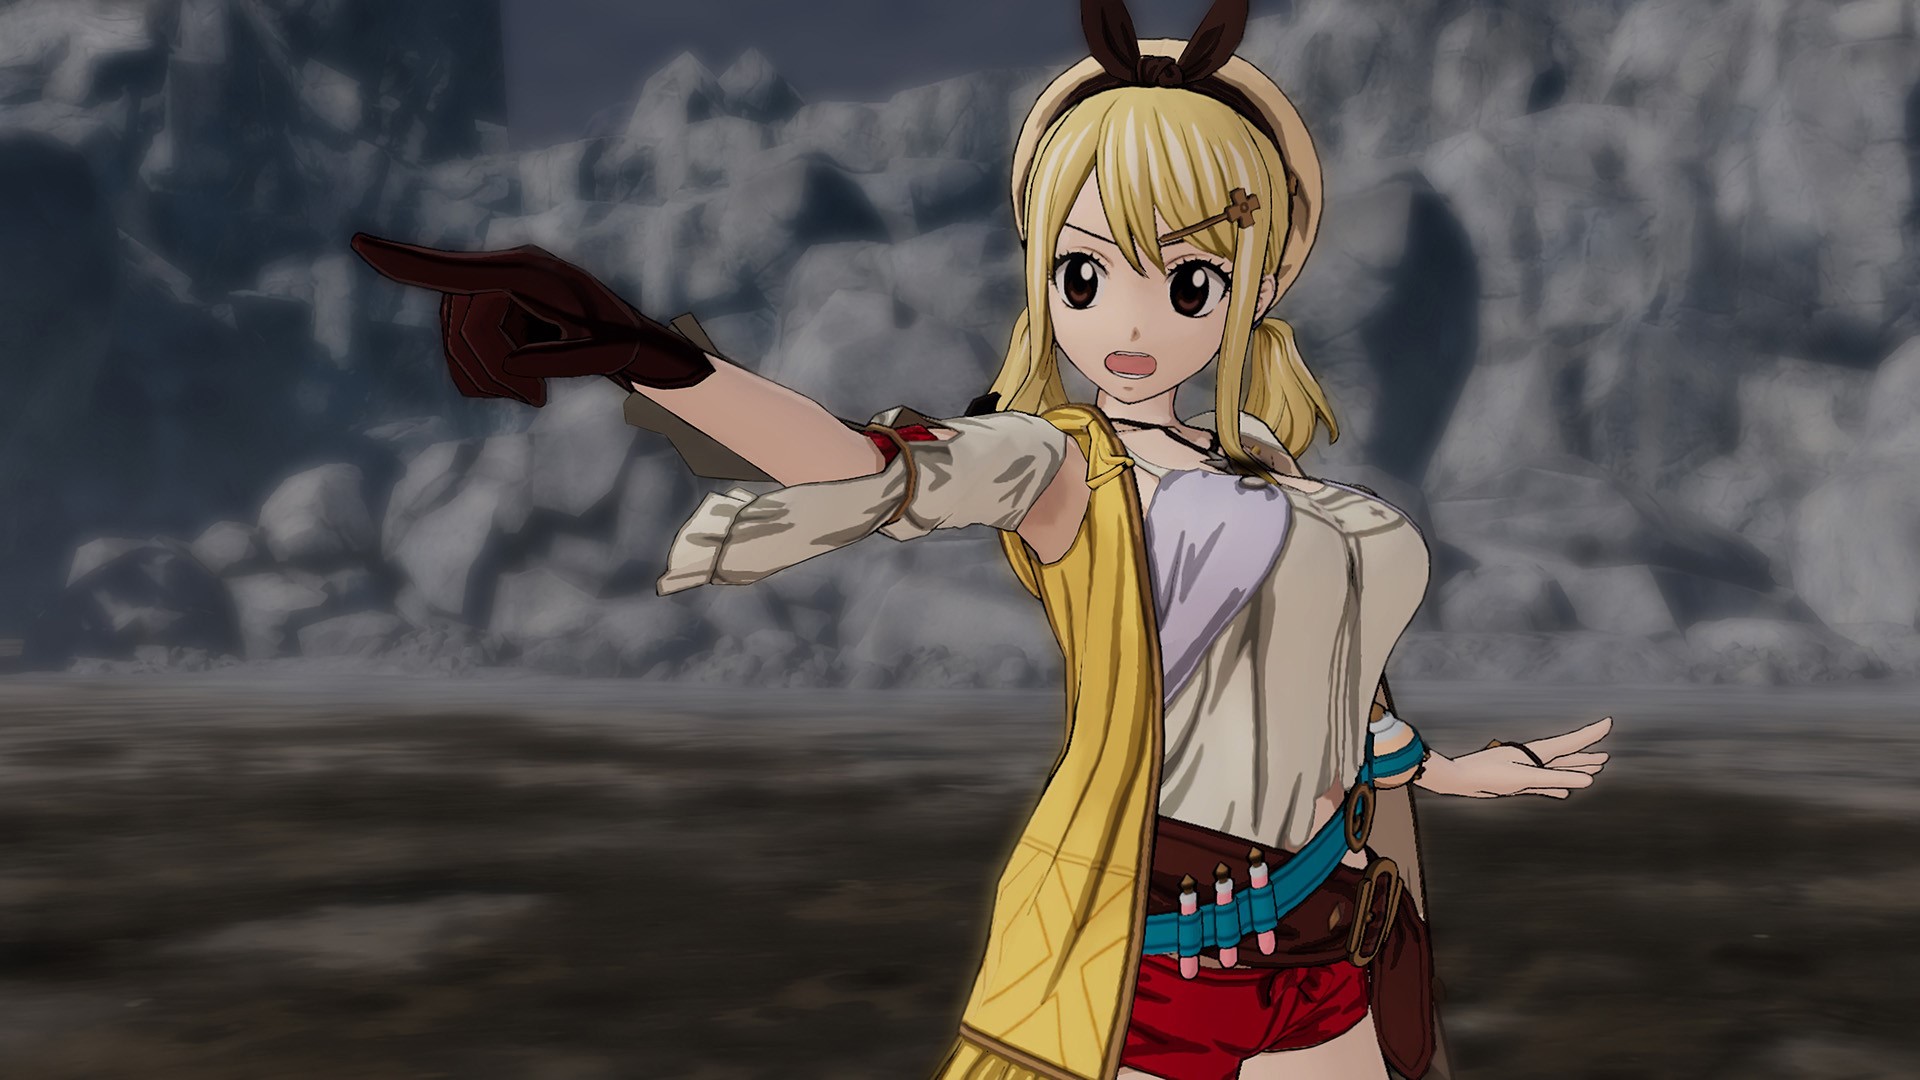 Fairy Tail' release date, trailer, and DLC for the magical anime video game